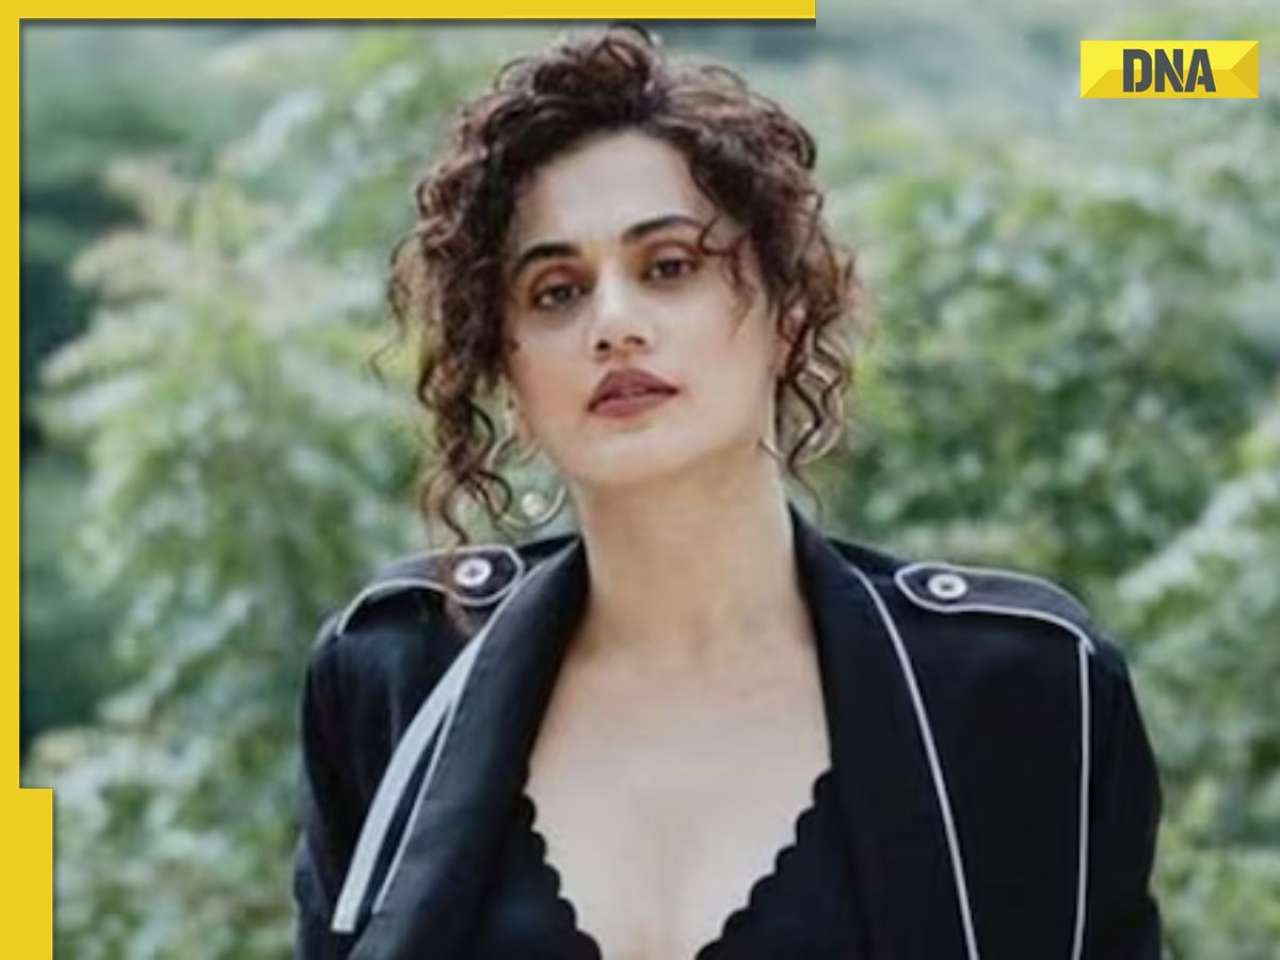 Taapsee Pannu says paparazzi 'press buttons' of celebs, reveals why she ignores them: 'If you shove the camera in..'